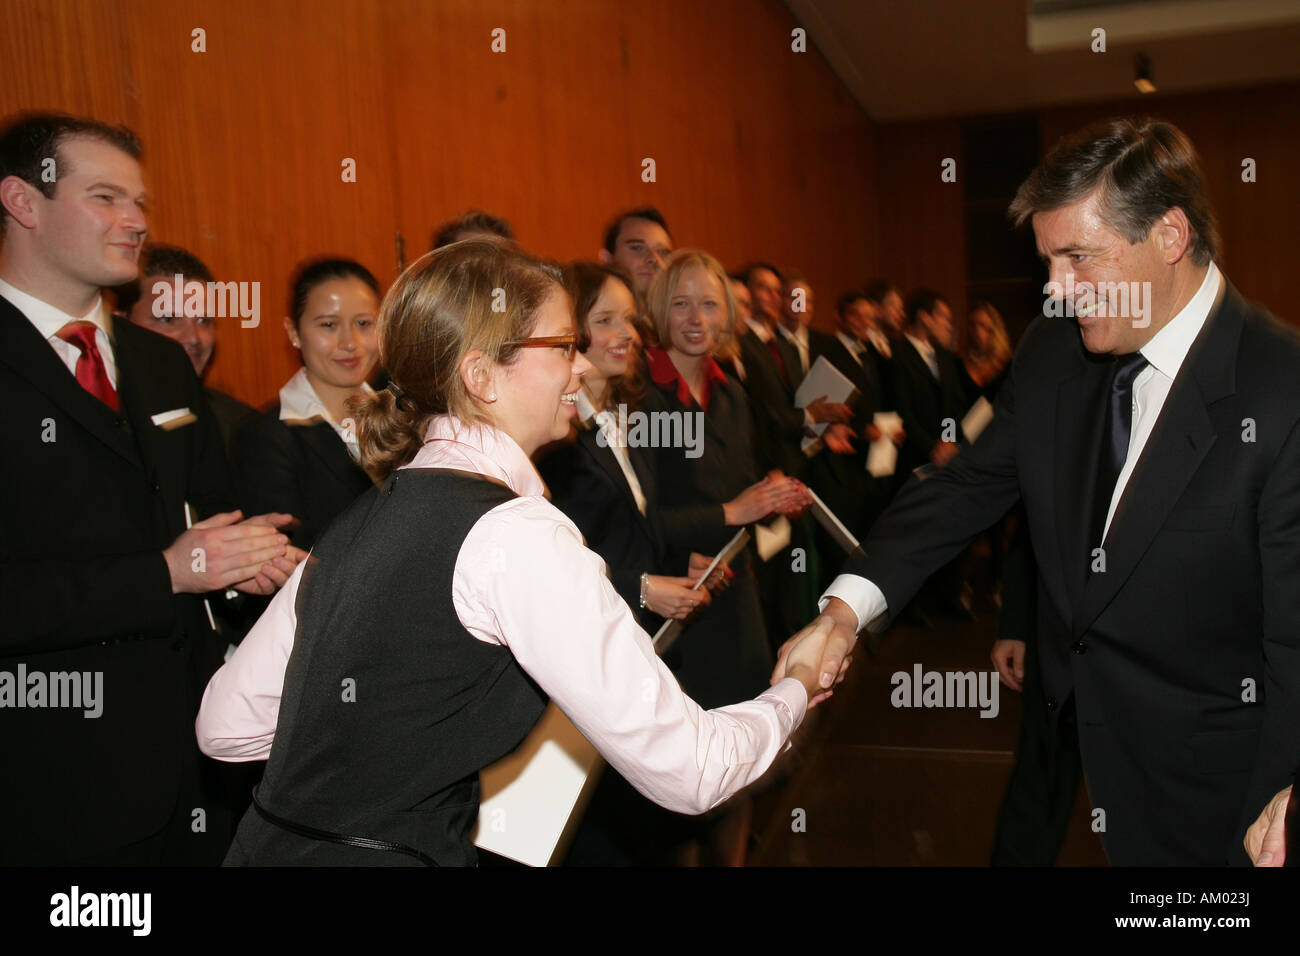 Dr. Josef Ackermann, chairman of the board of management from the Deutsche Bank AG, shaking hands with economy students Stock Photo